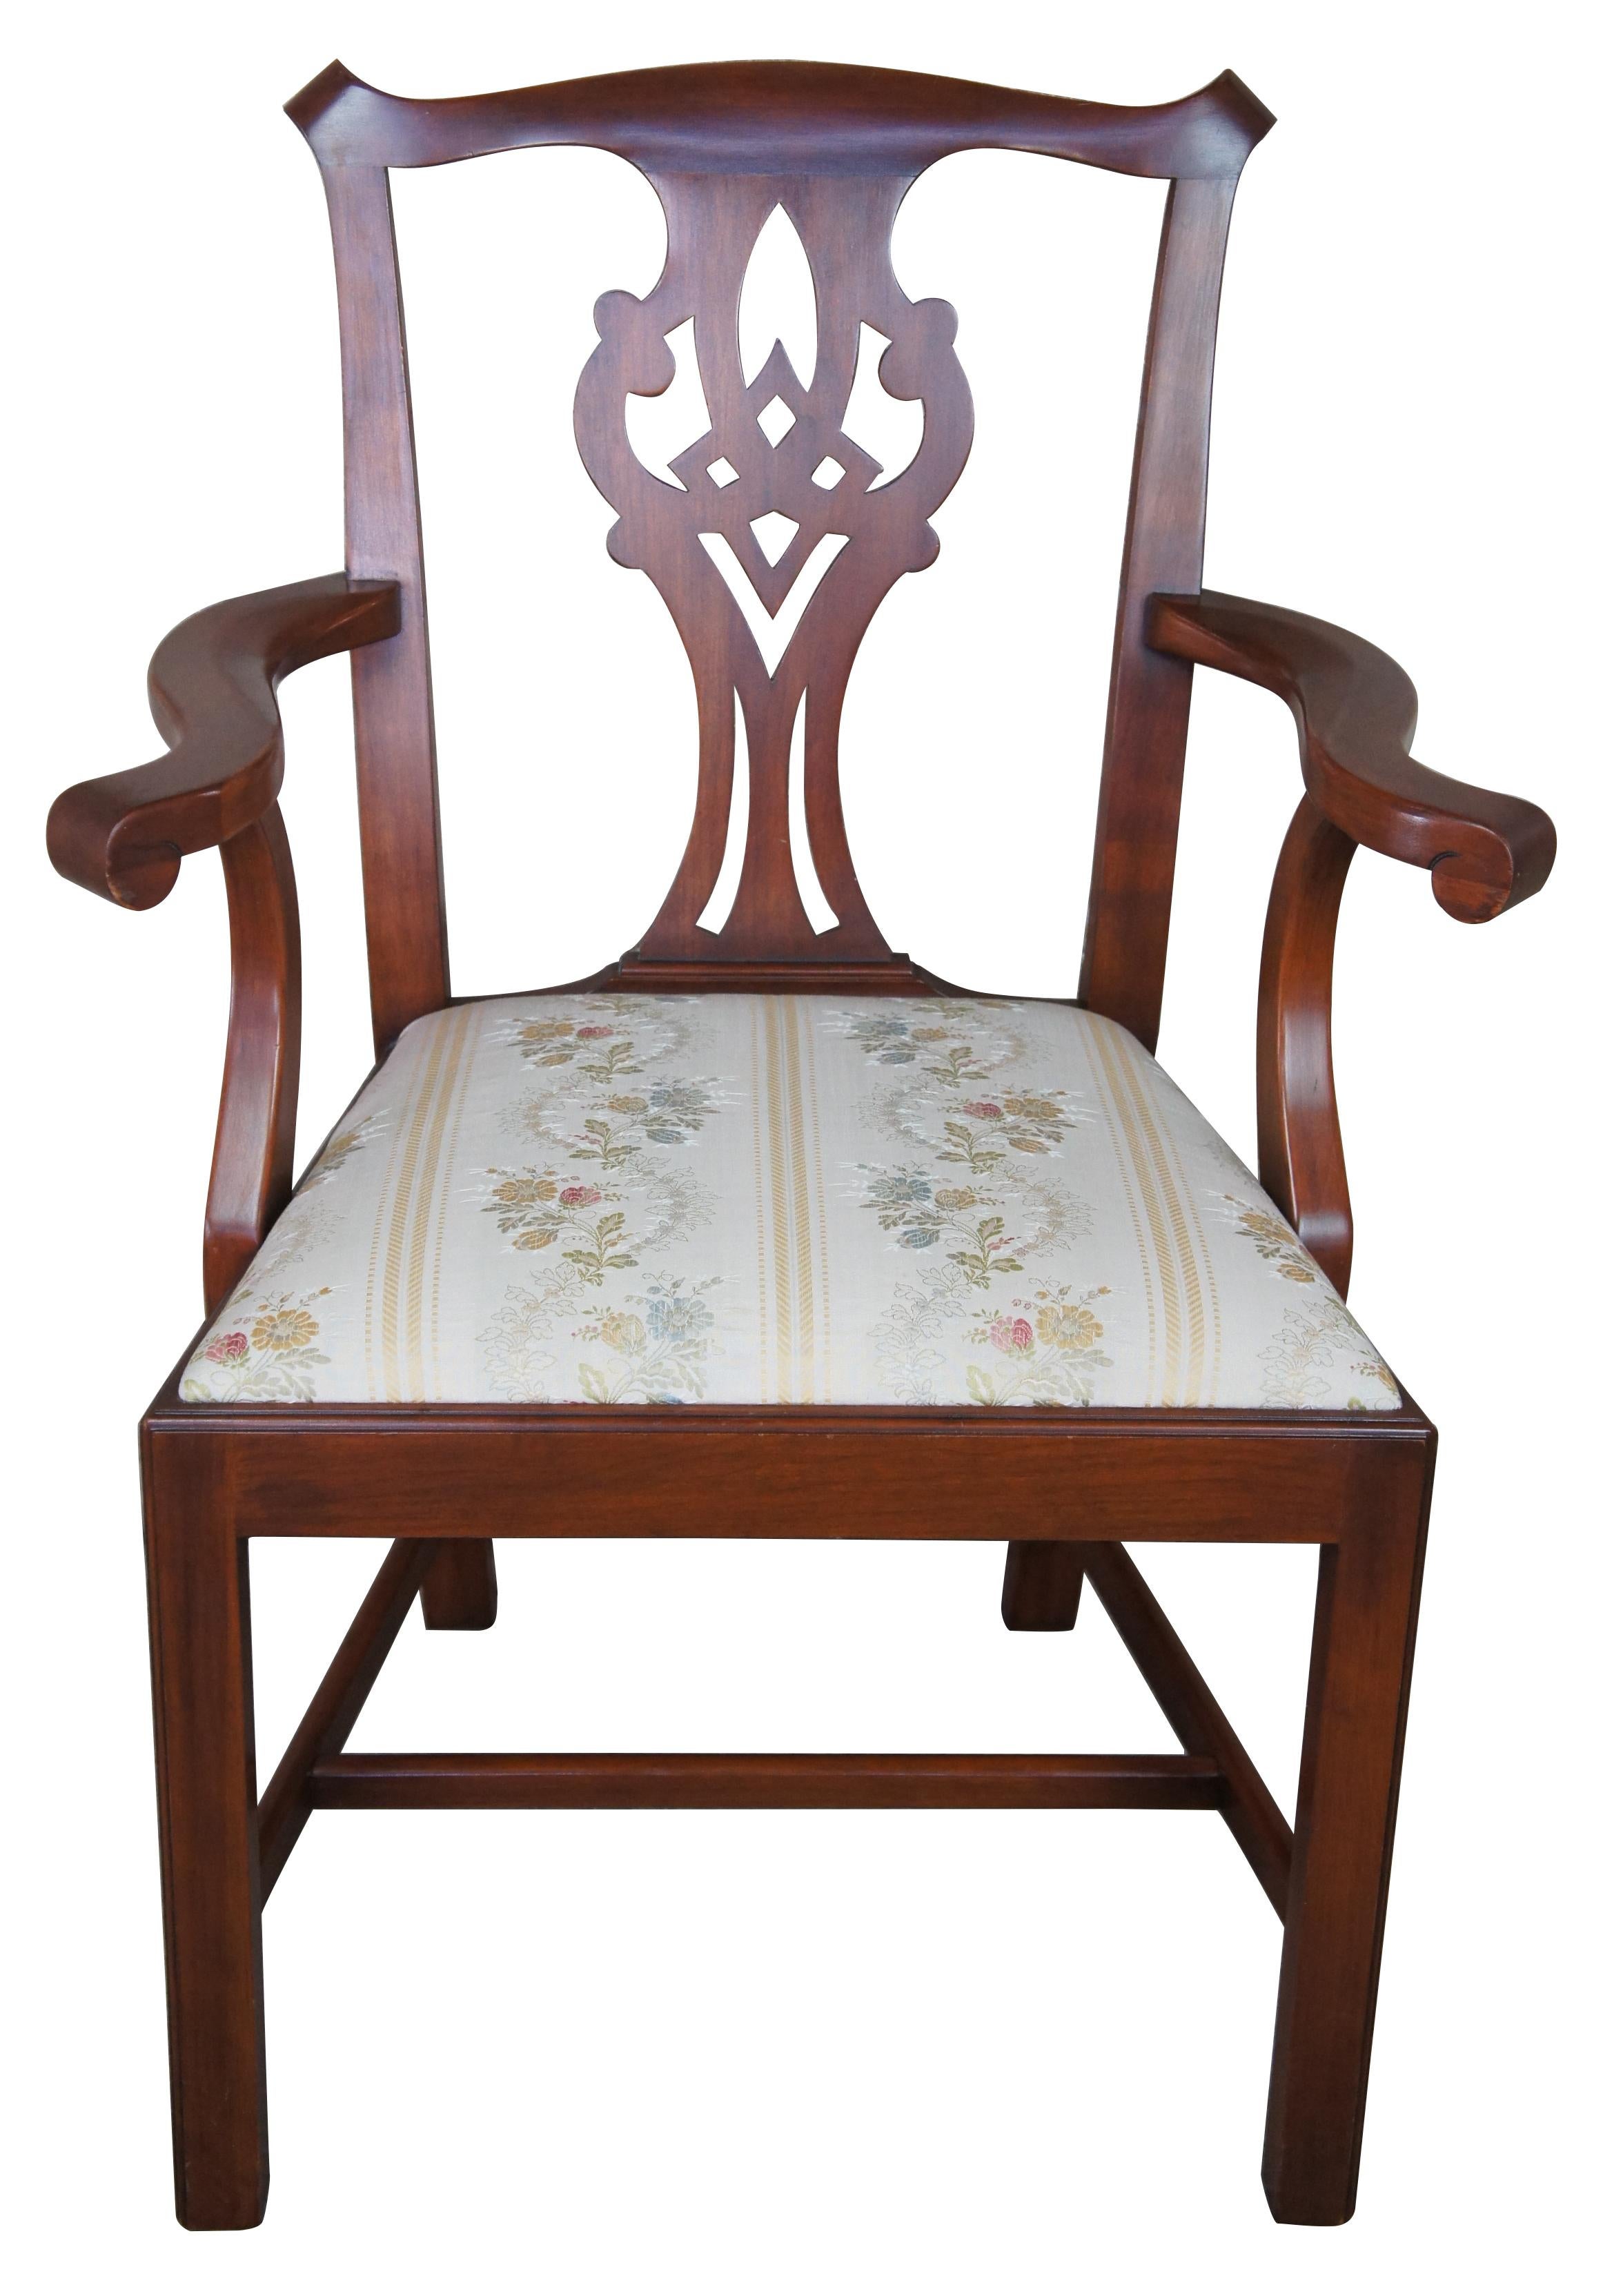 8 Henkel Harris Winchester Cherry Chippendale style dining chairs model 101

Late 20th century Chippendale style dining chairs by Henkel Harris. Model 101 finish 24. 18th century design. Made from Winchester Cherry with traditional splay backs and